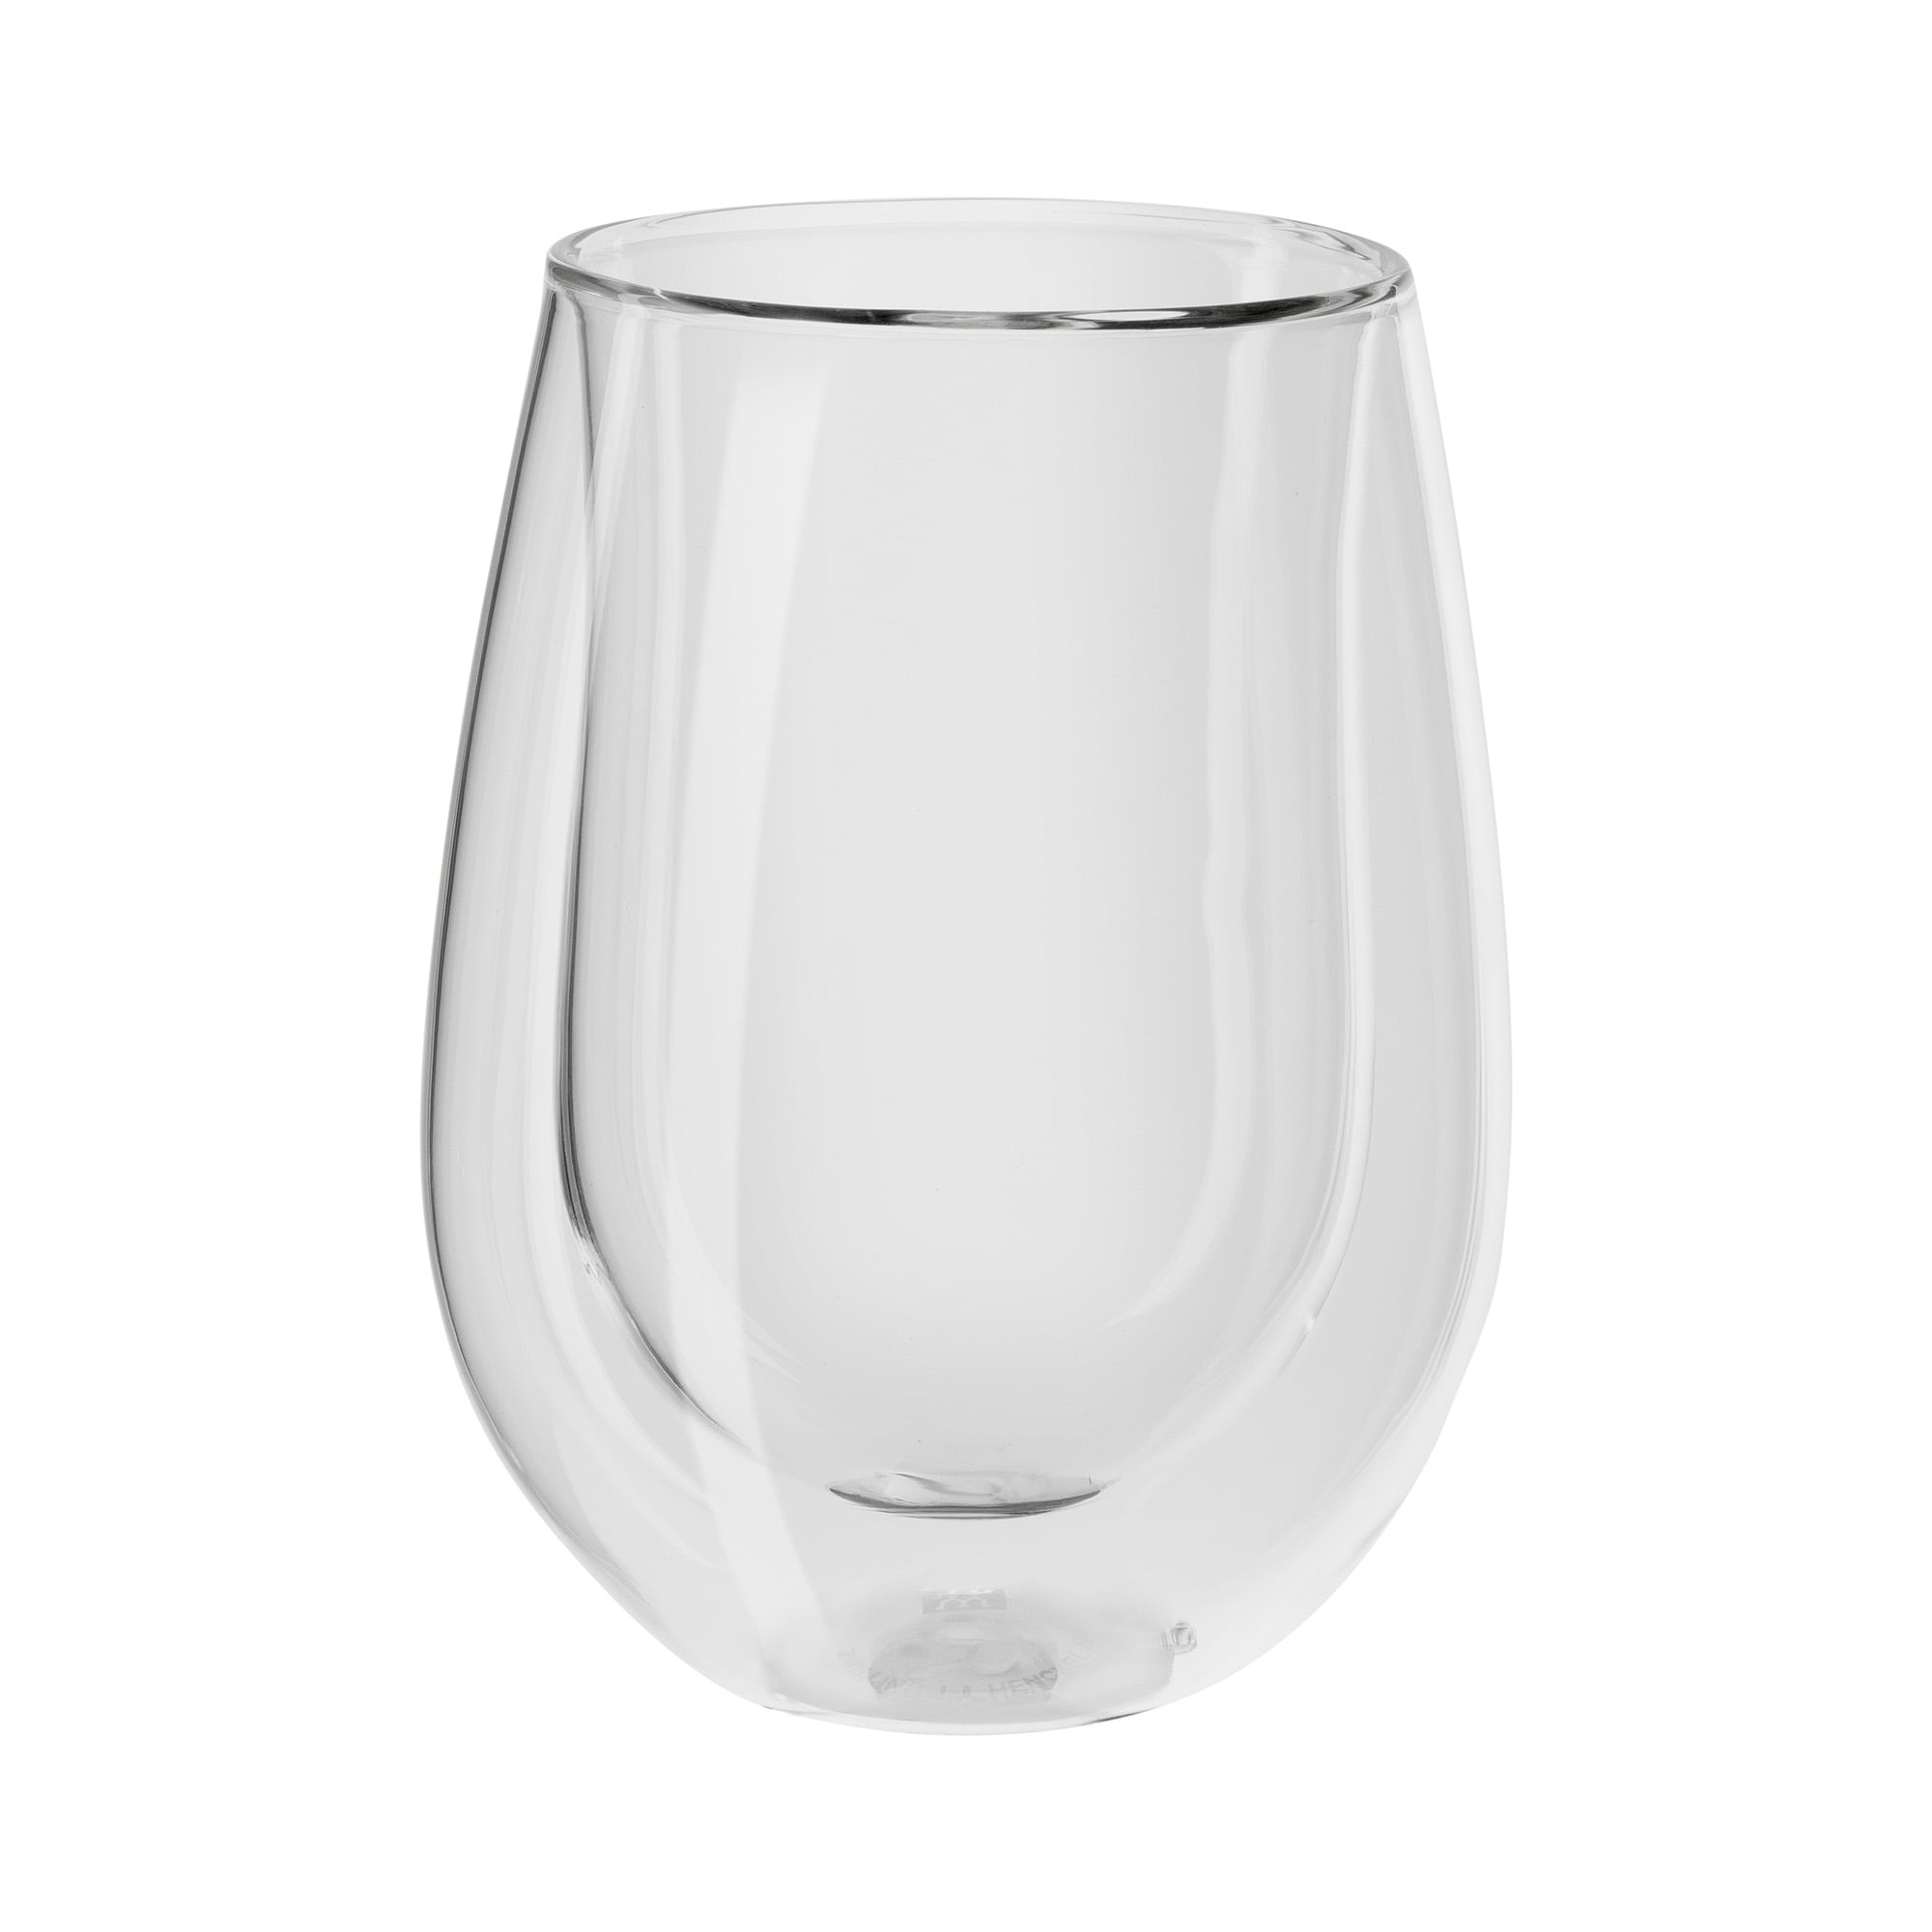 https://ak1.ostkcdn.com/images/products/is/images/direct/a254419aacc22709961bc2432078802871a03627/ZWILLING-Sorrento-2-pc-Double-Wall-Stemless-White-Wine-Glass-Set.jpg